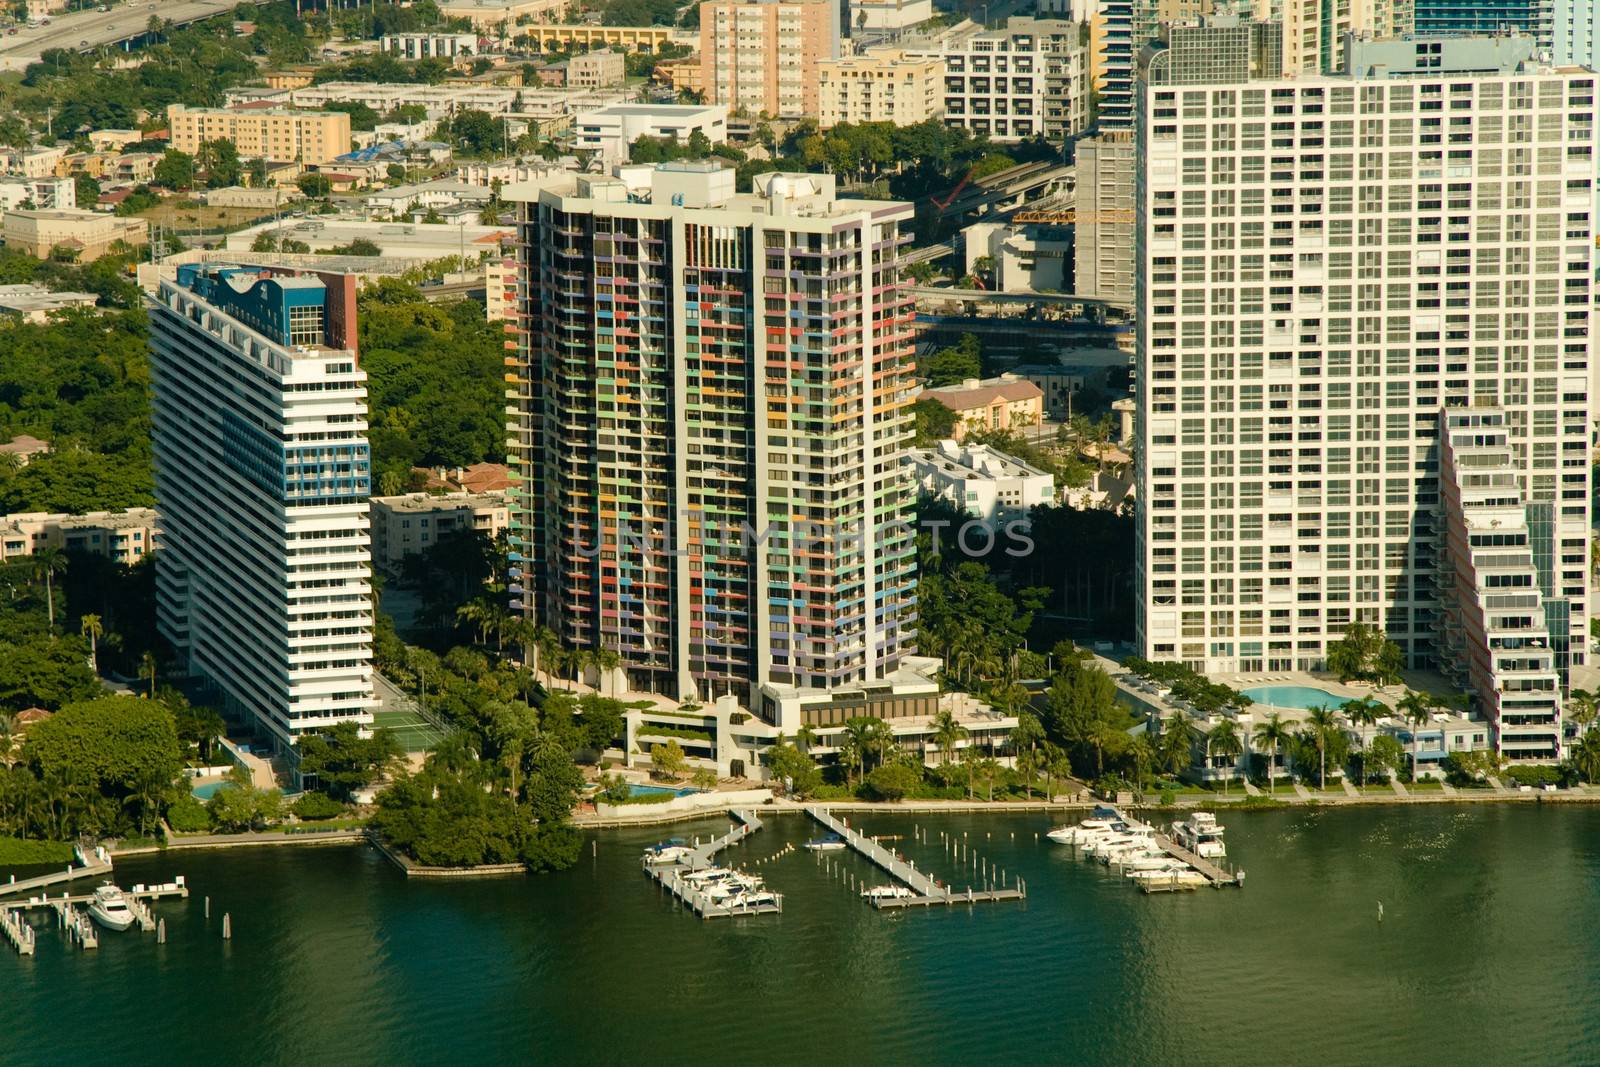 Aerial photography of diverse apartment buildings in the region of Miami, Florida.